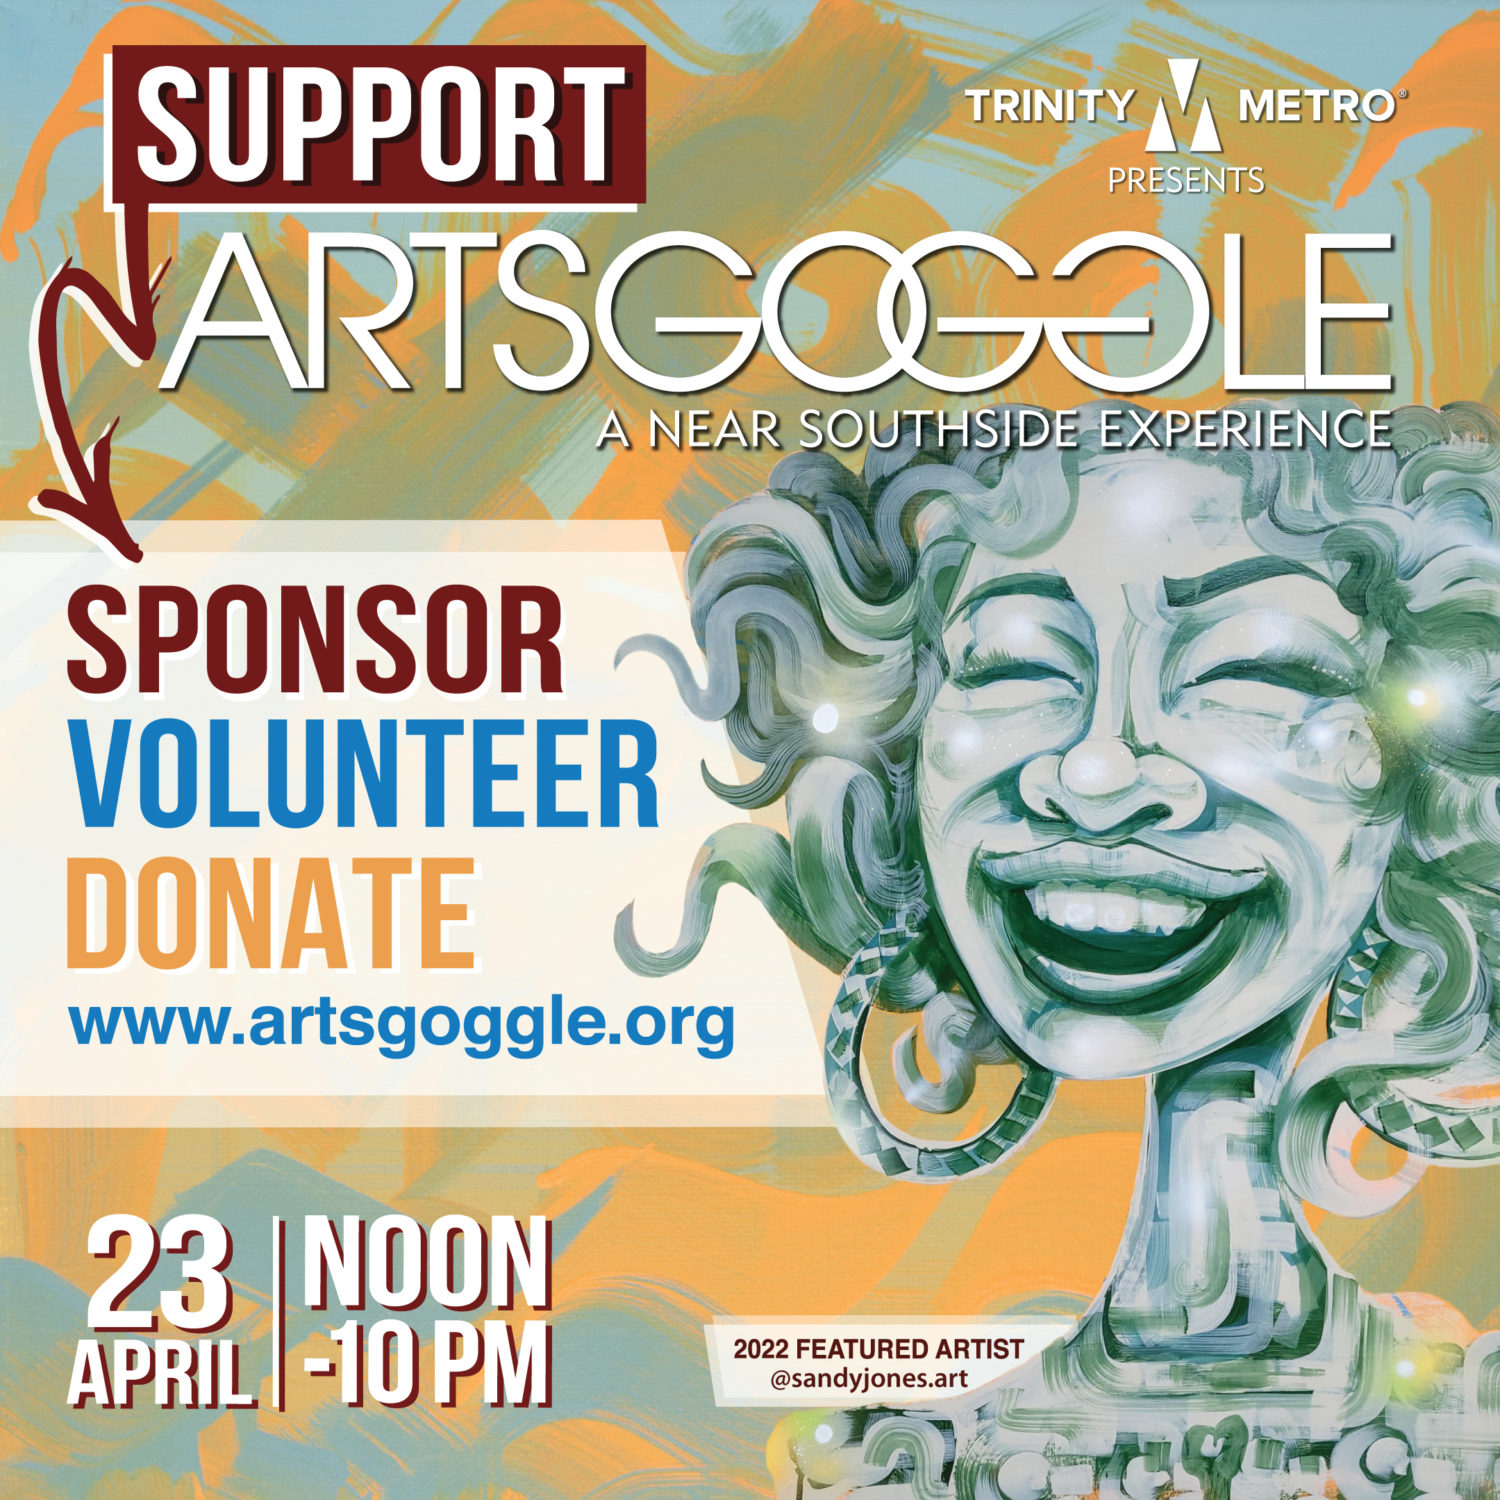 Support Arts Goggle